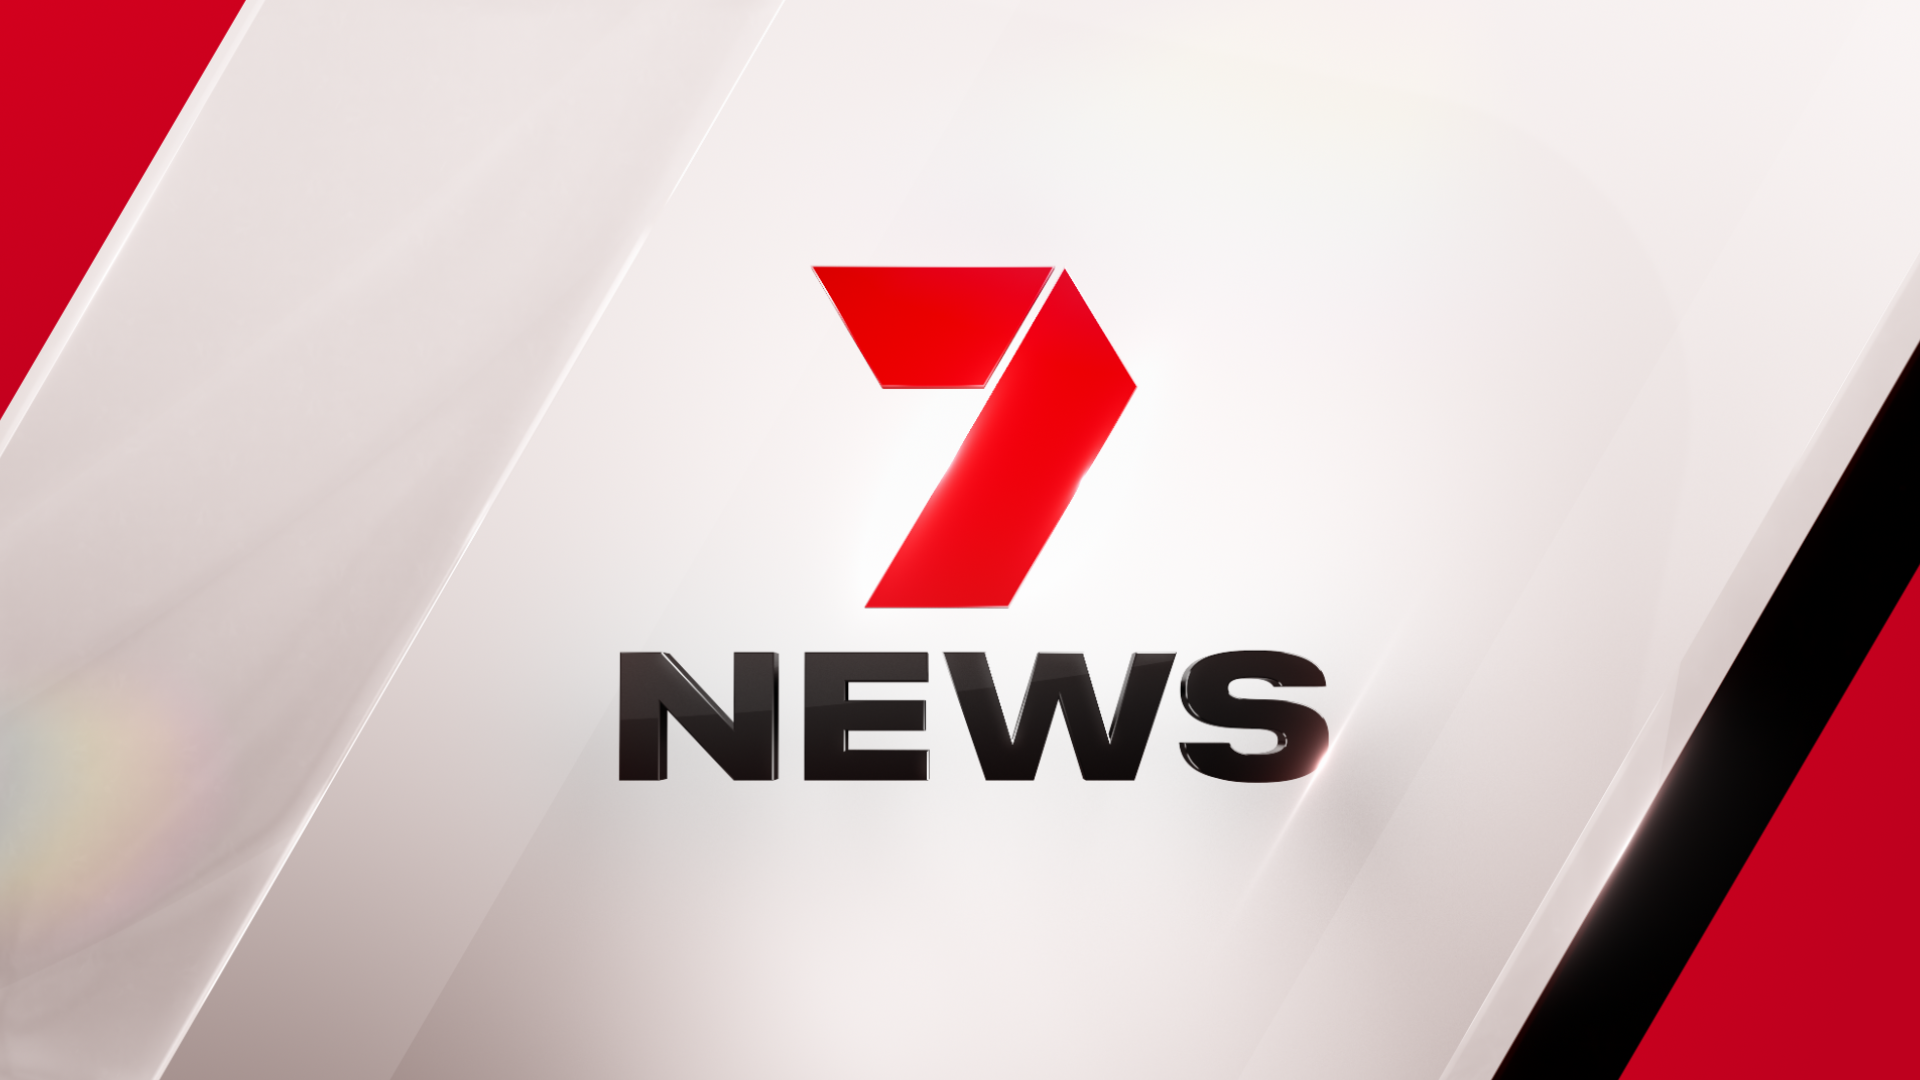 Australia turns to 7NEWS for Trump coverage - 4.45 million choose Seven for breaking news of shooting